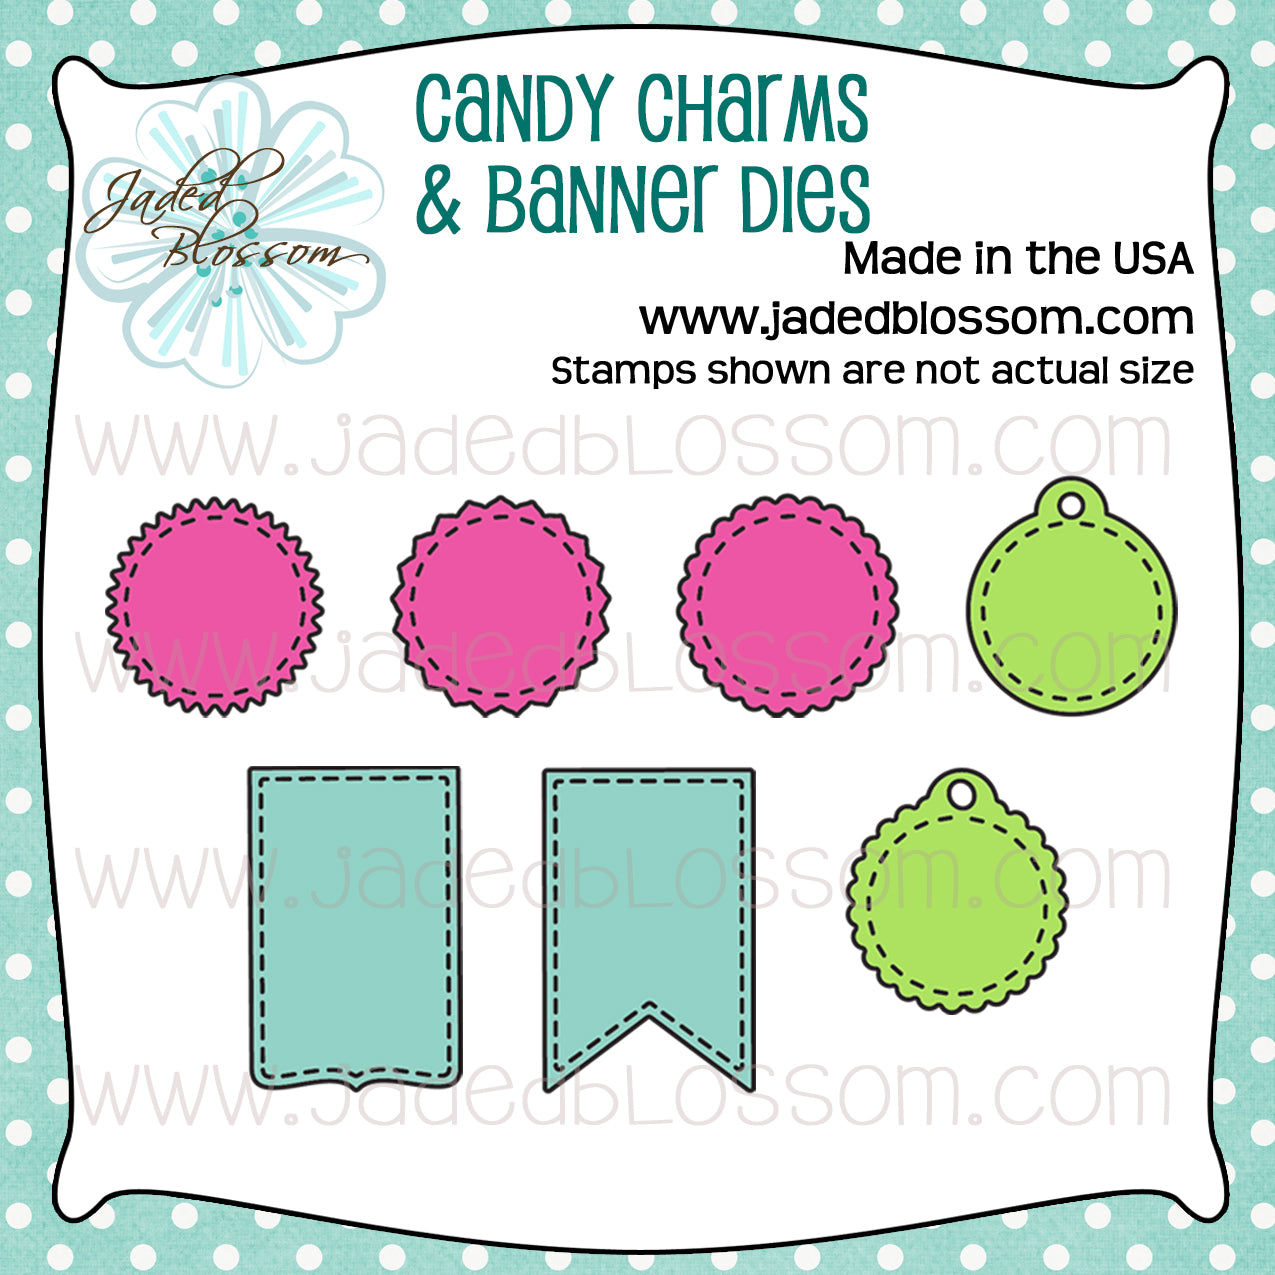 Candy Charms & Banner Dies